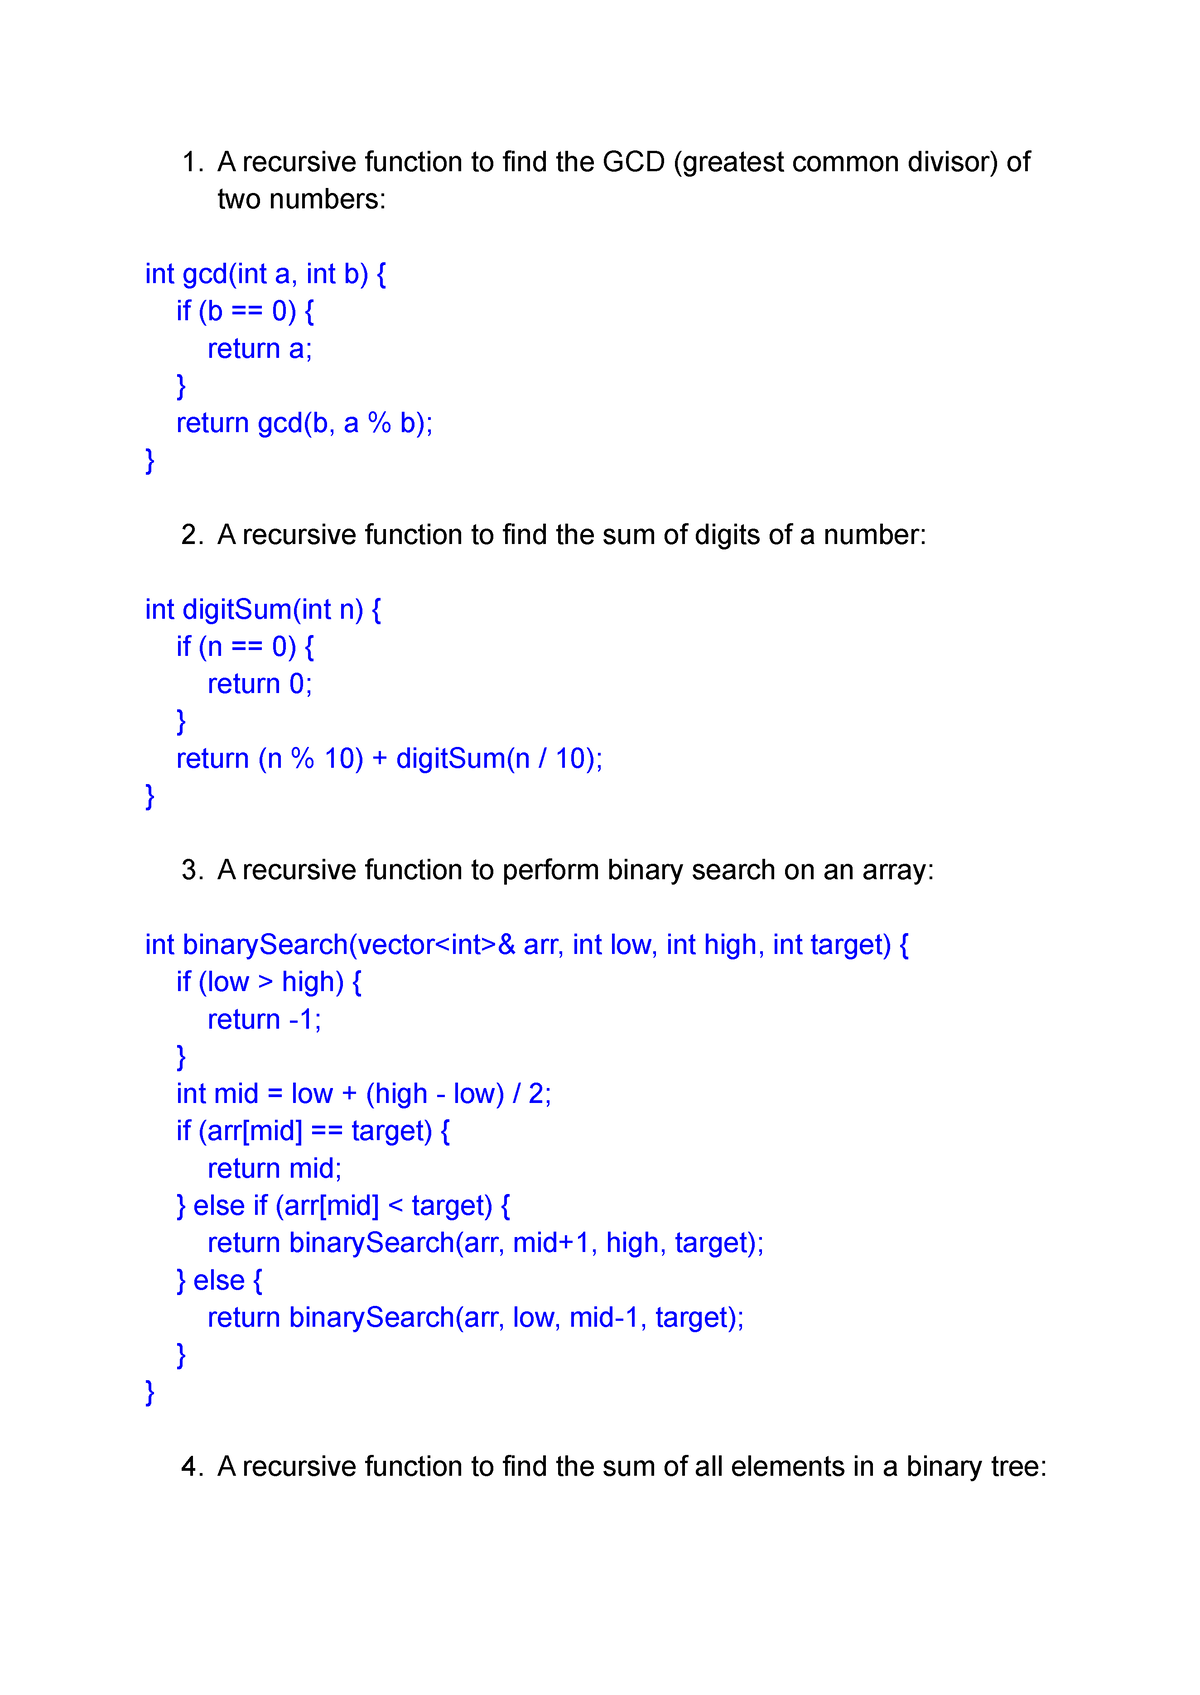 C++ recursive example statements - A recursive function to find the GCD ...